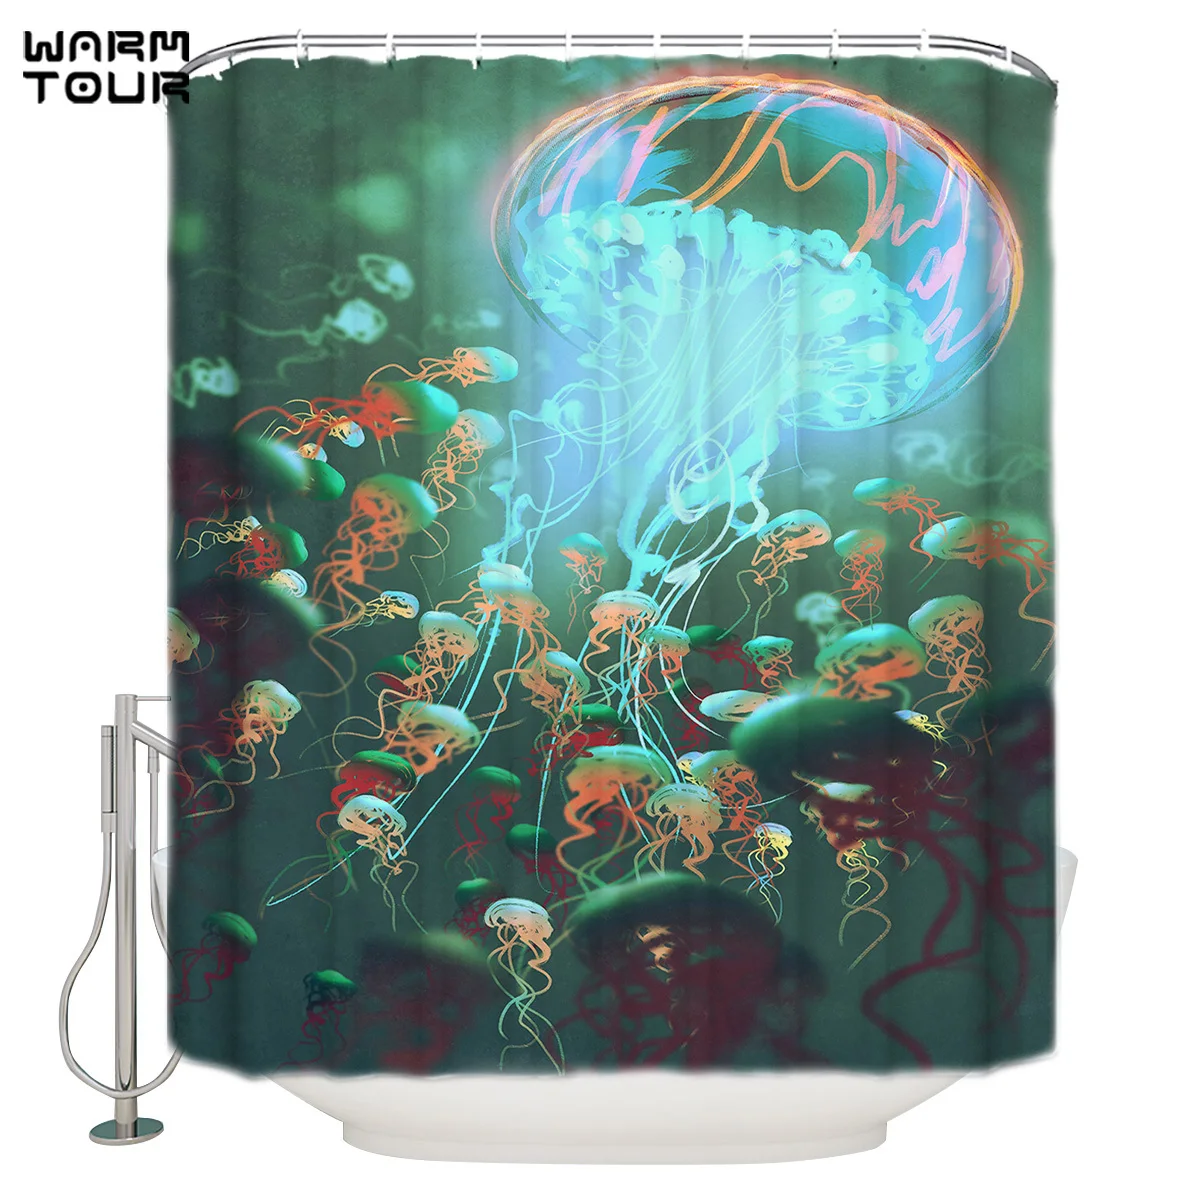 

WARMTOUR Shower Curtain Jellyfish King Glowing Jellyfish Extra Long Fabric Bath Shower Curtains Bathroom Decor Sets with Hooks